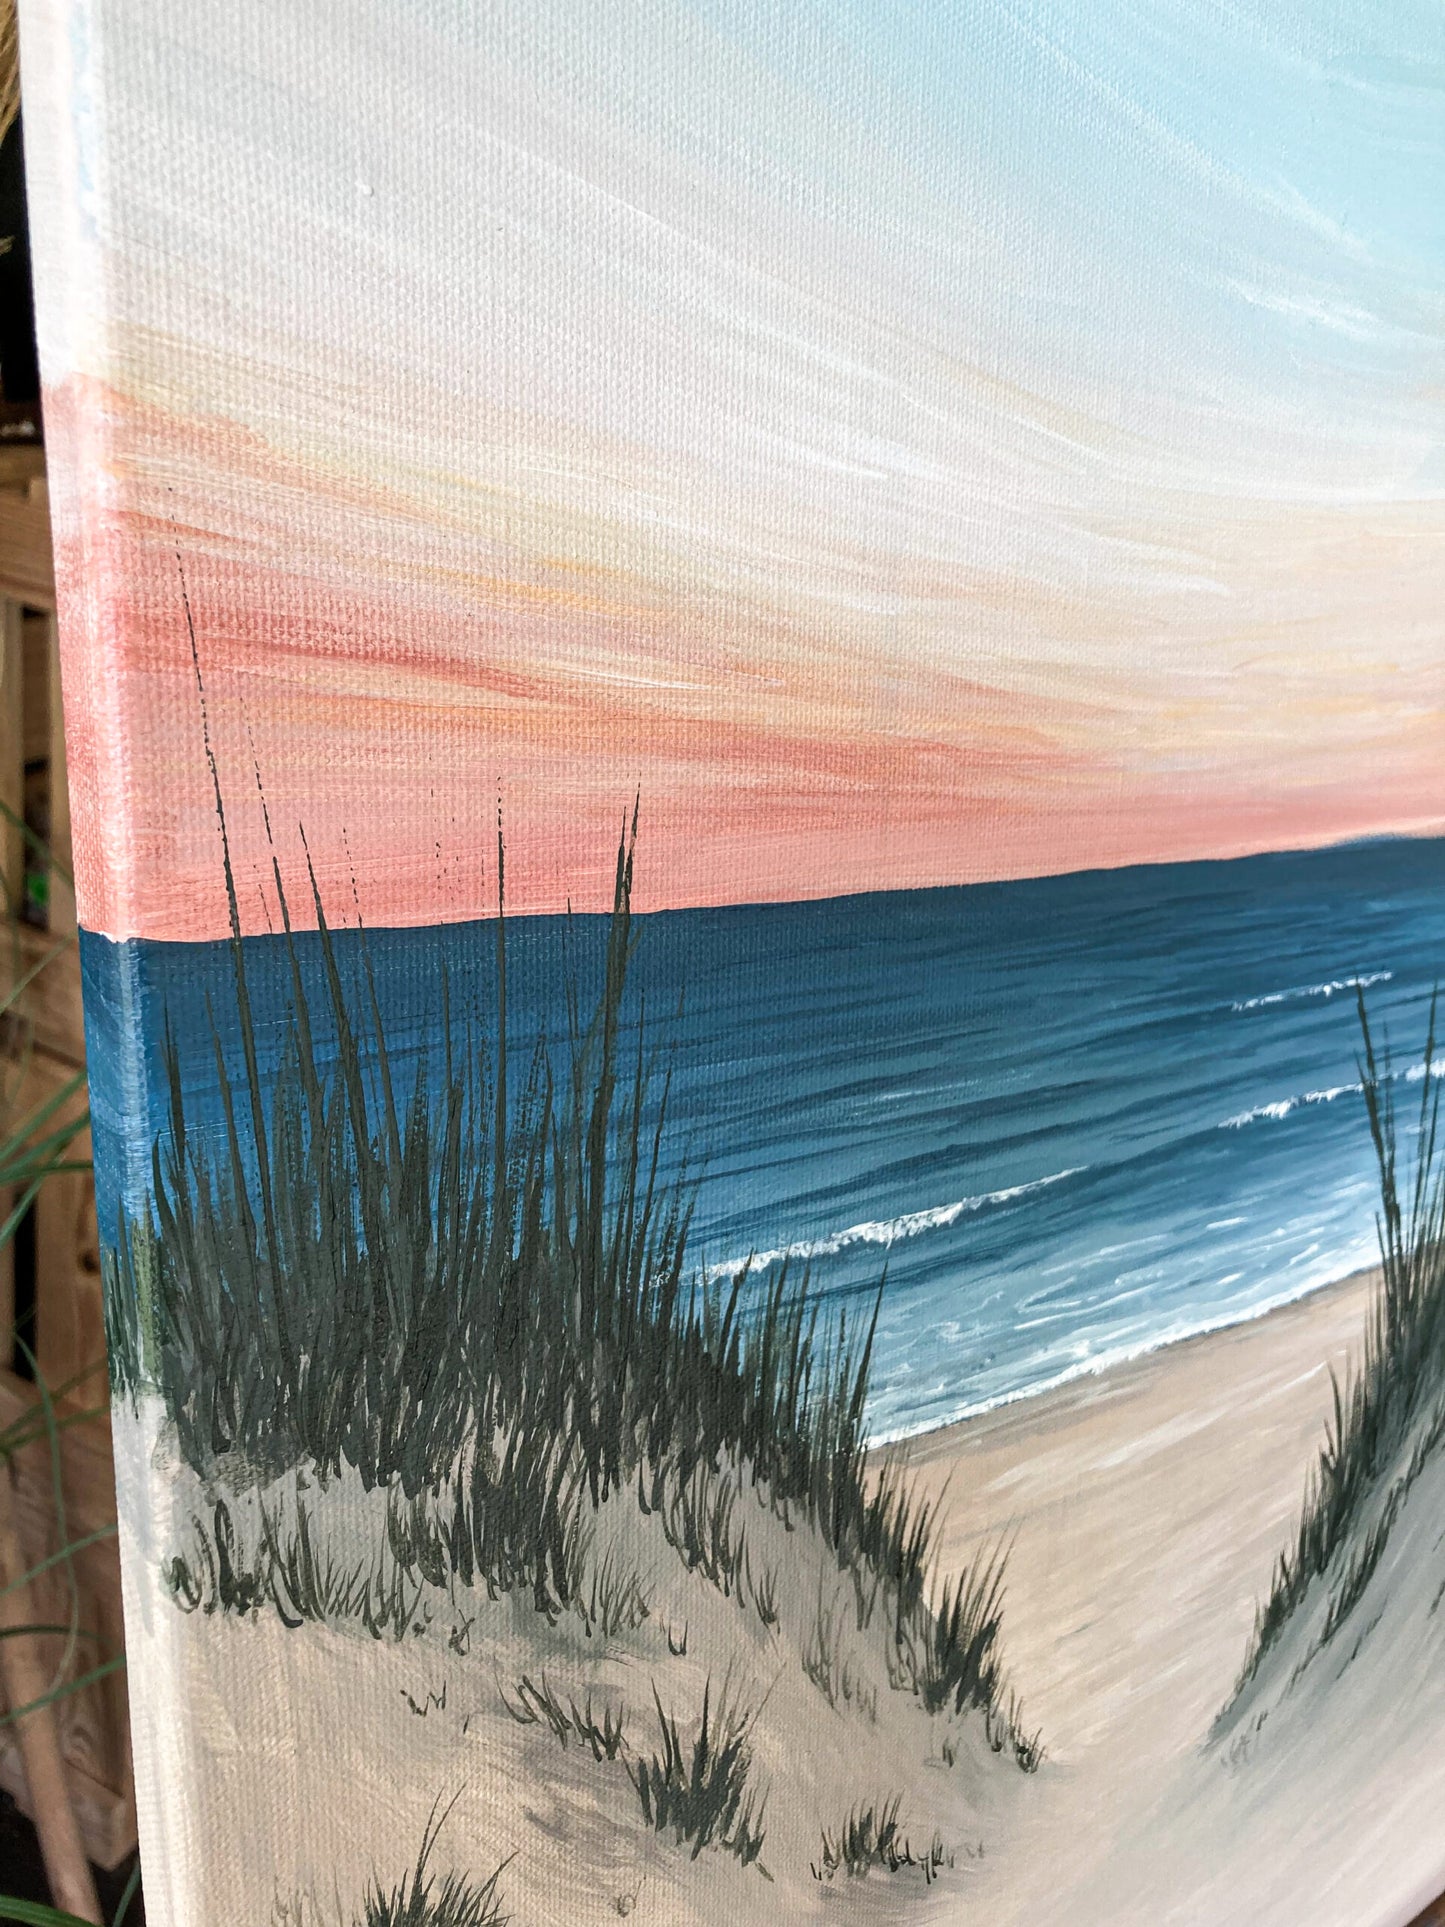 seascape painting with magical sunset and sand dunes beach vibes calming painting details